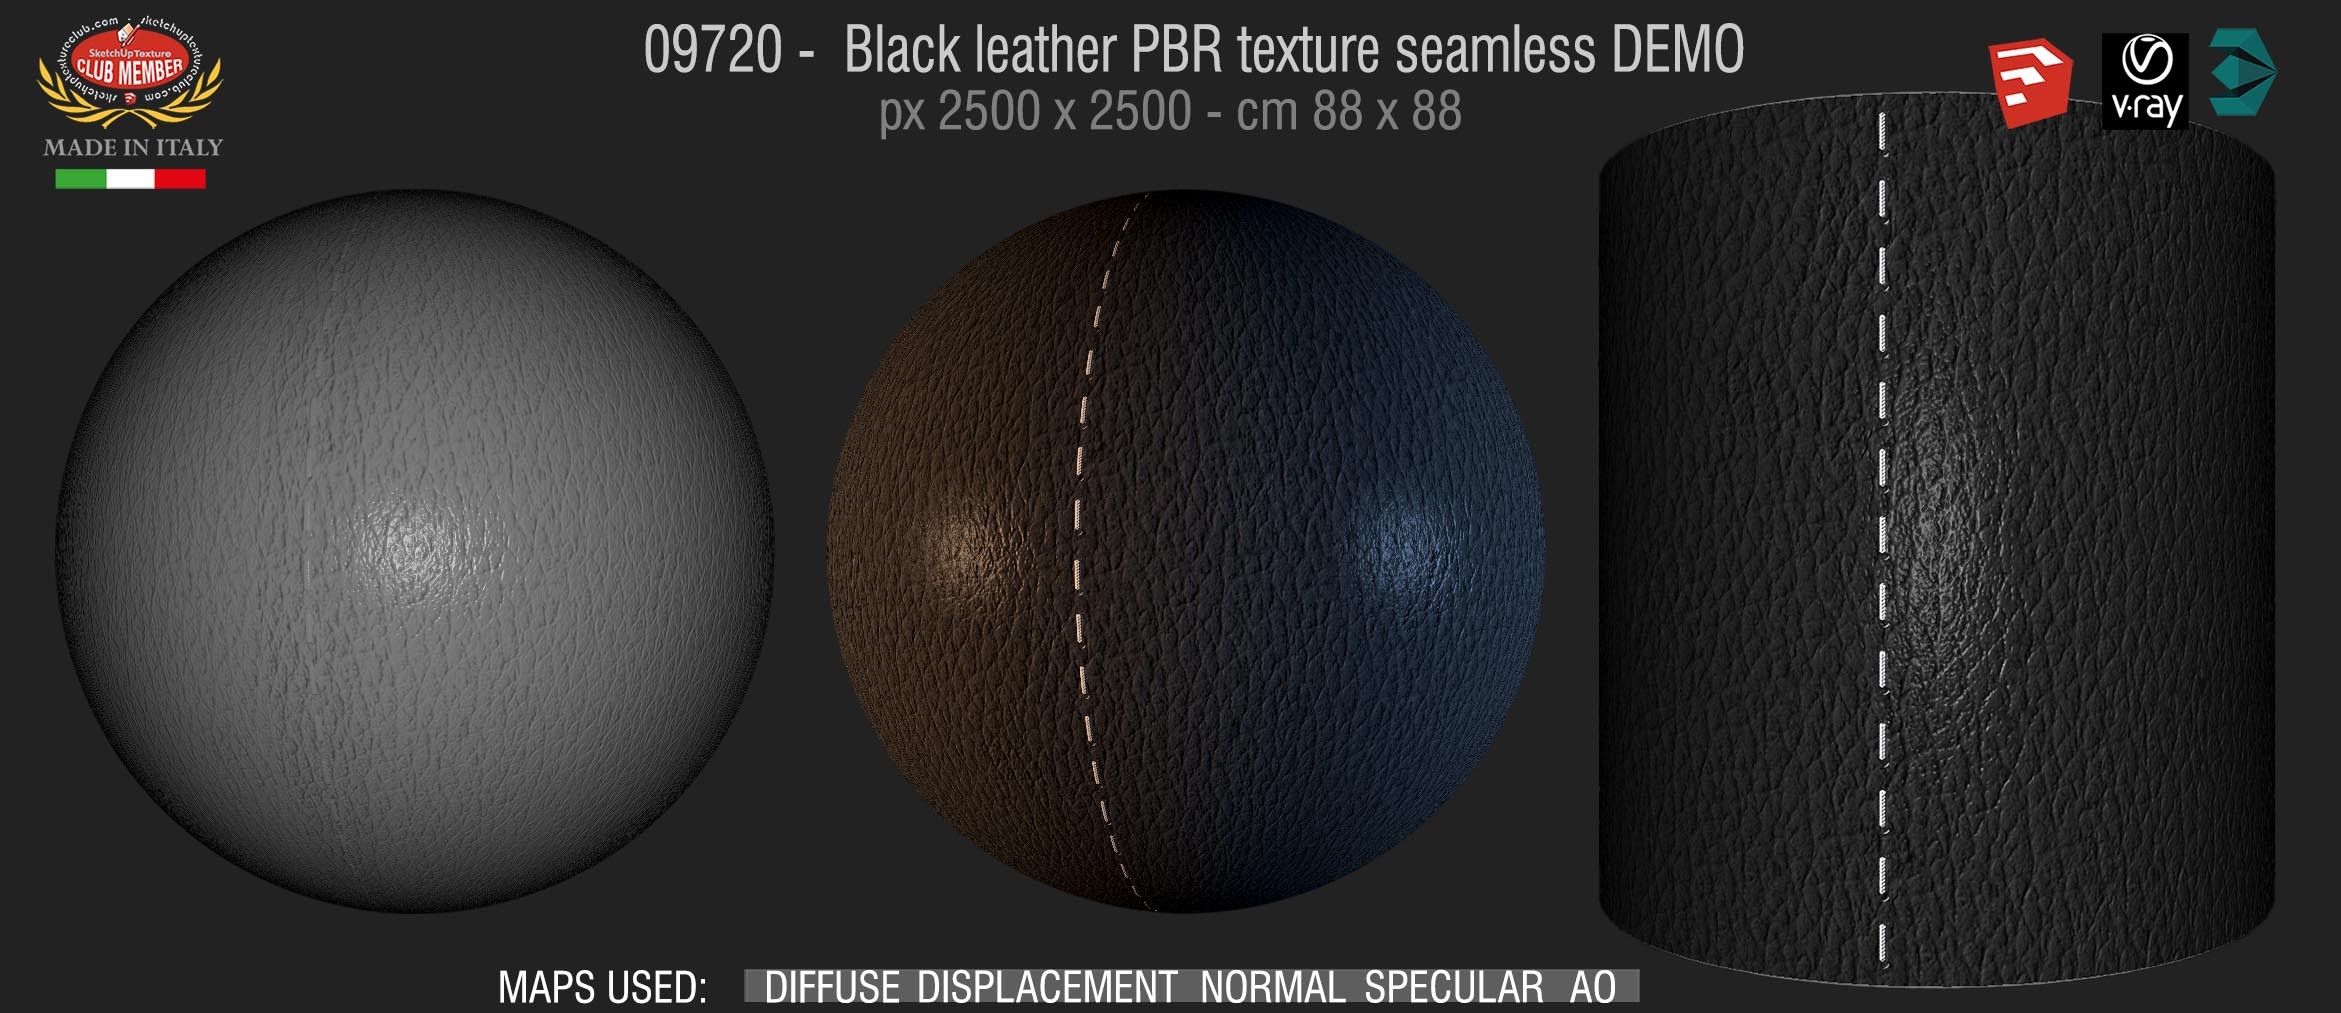 09718 Black leather PBR texture seamless DEMO